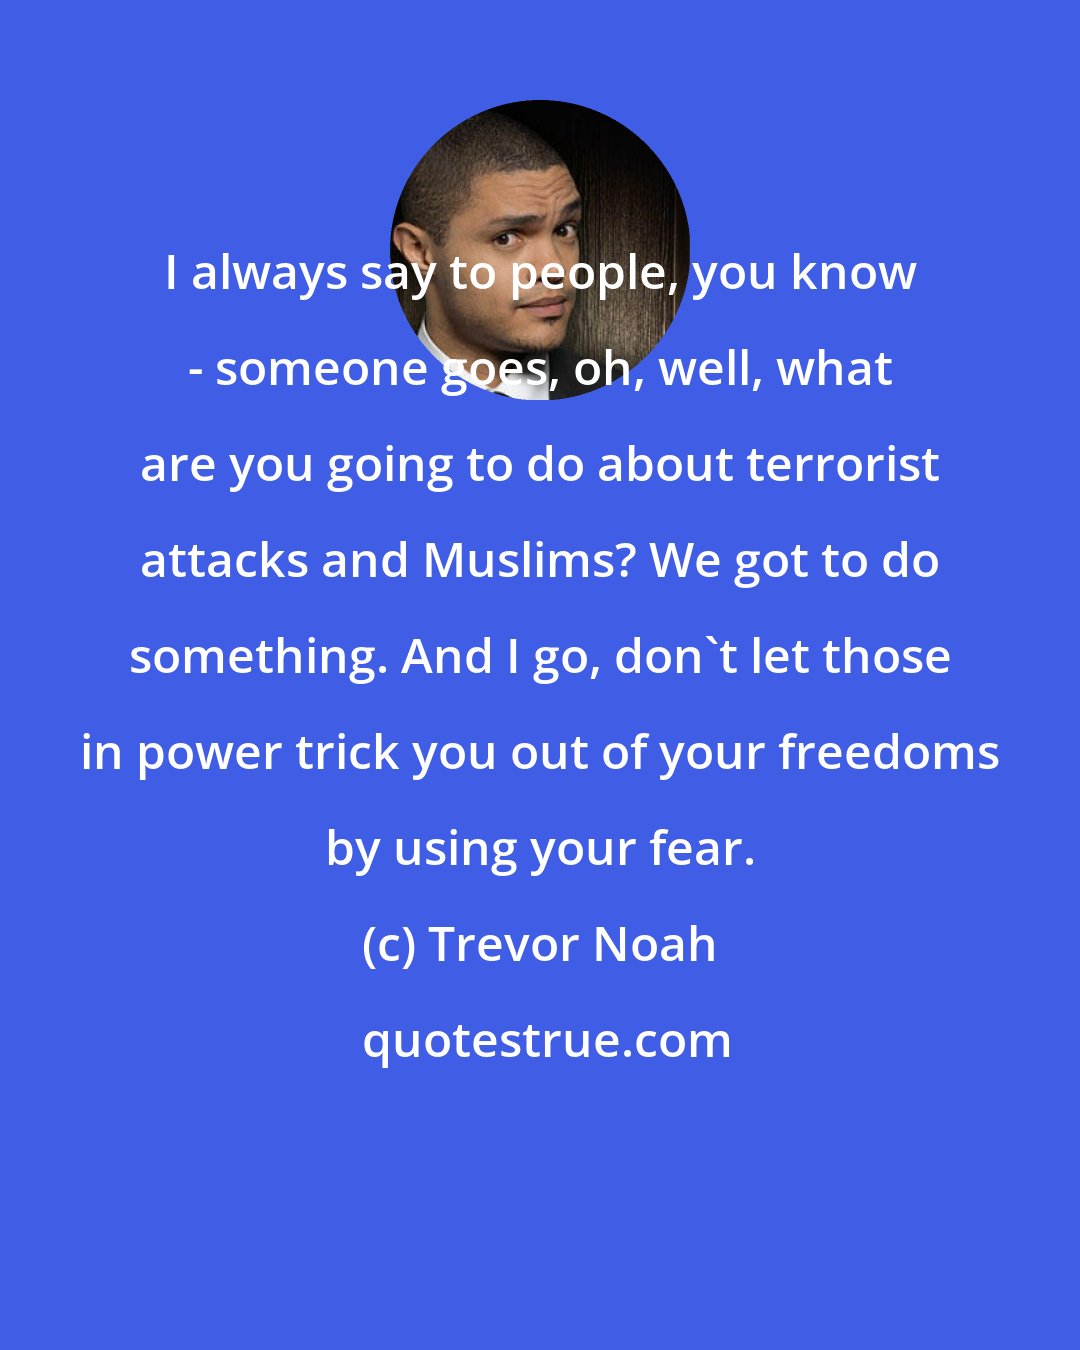 Trevor Noah: I always say to people, you know - someone goes, oh, well, what are you going to do about terrorist attacks and Muslims? We got to do something. And I go, don't let those in power trick you out of your freedoms by using your fear.